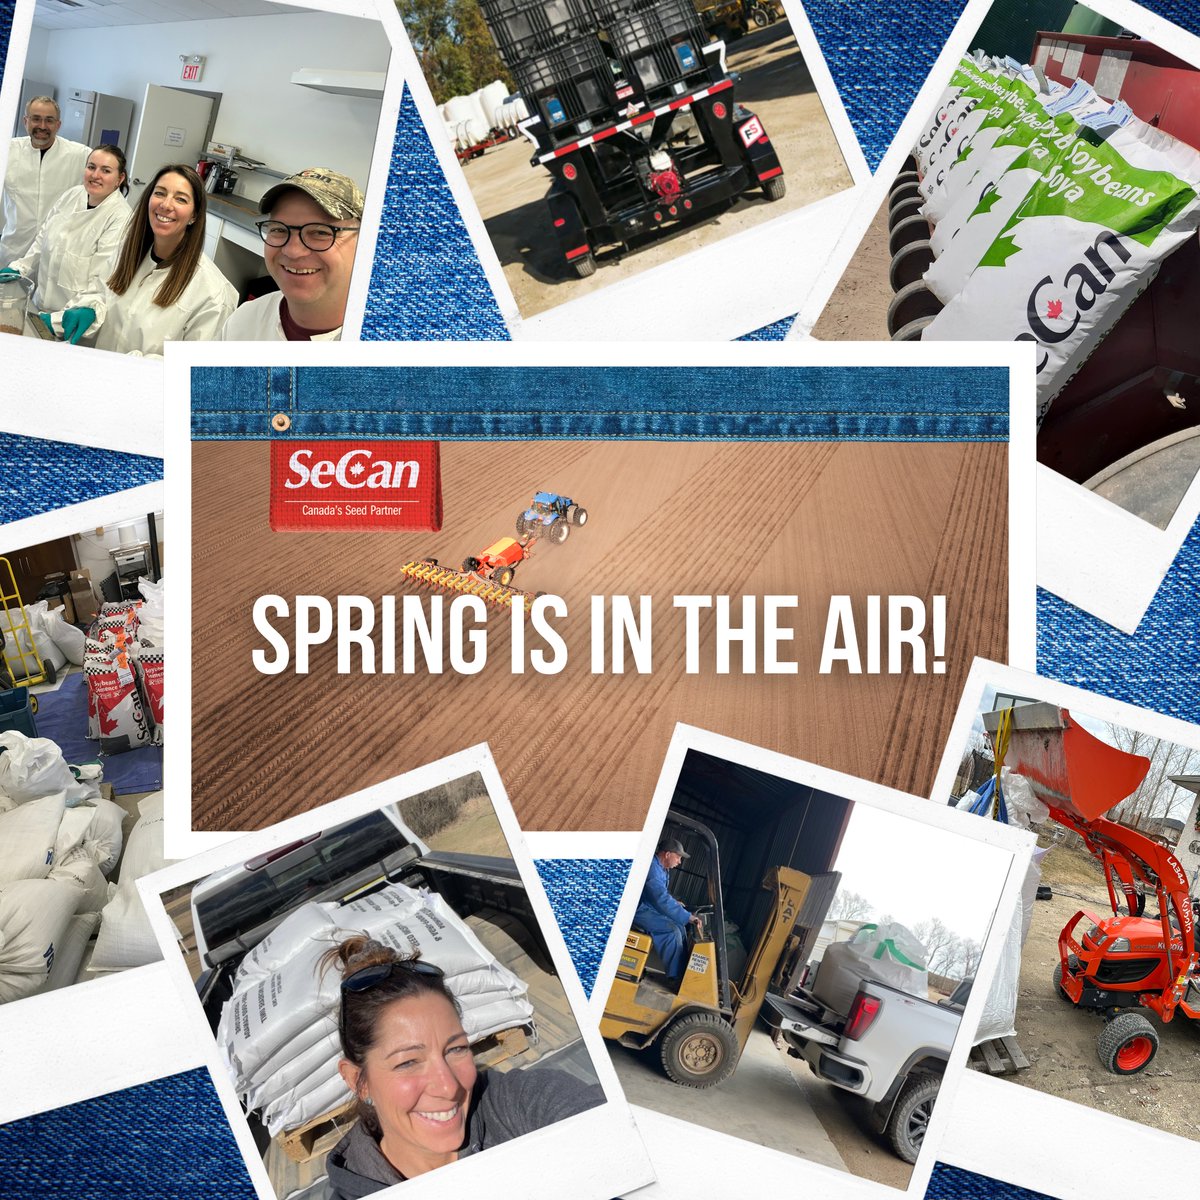 Spring is in the air and our Reps are on the road! Our SeCan reps are working hard delivering seed and supporting our members as #Plant2024 continues to pick up throughout Canada. Remember to tag @SeCan and use our hashtag #GenesThatFitYourFarm this planting season! 🌱🌾